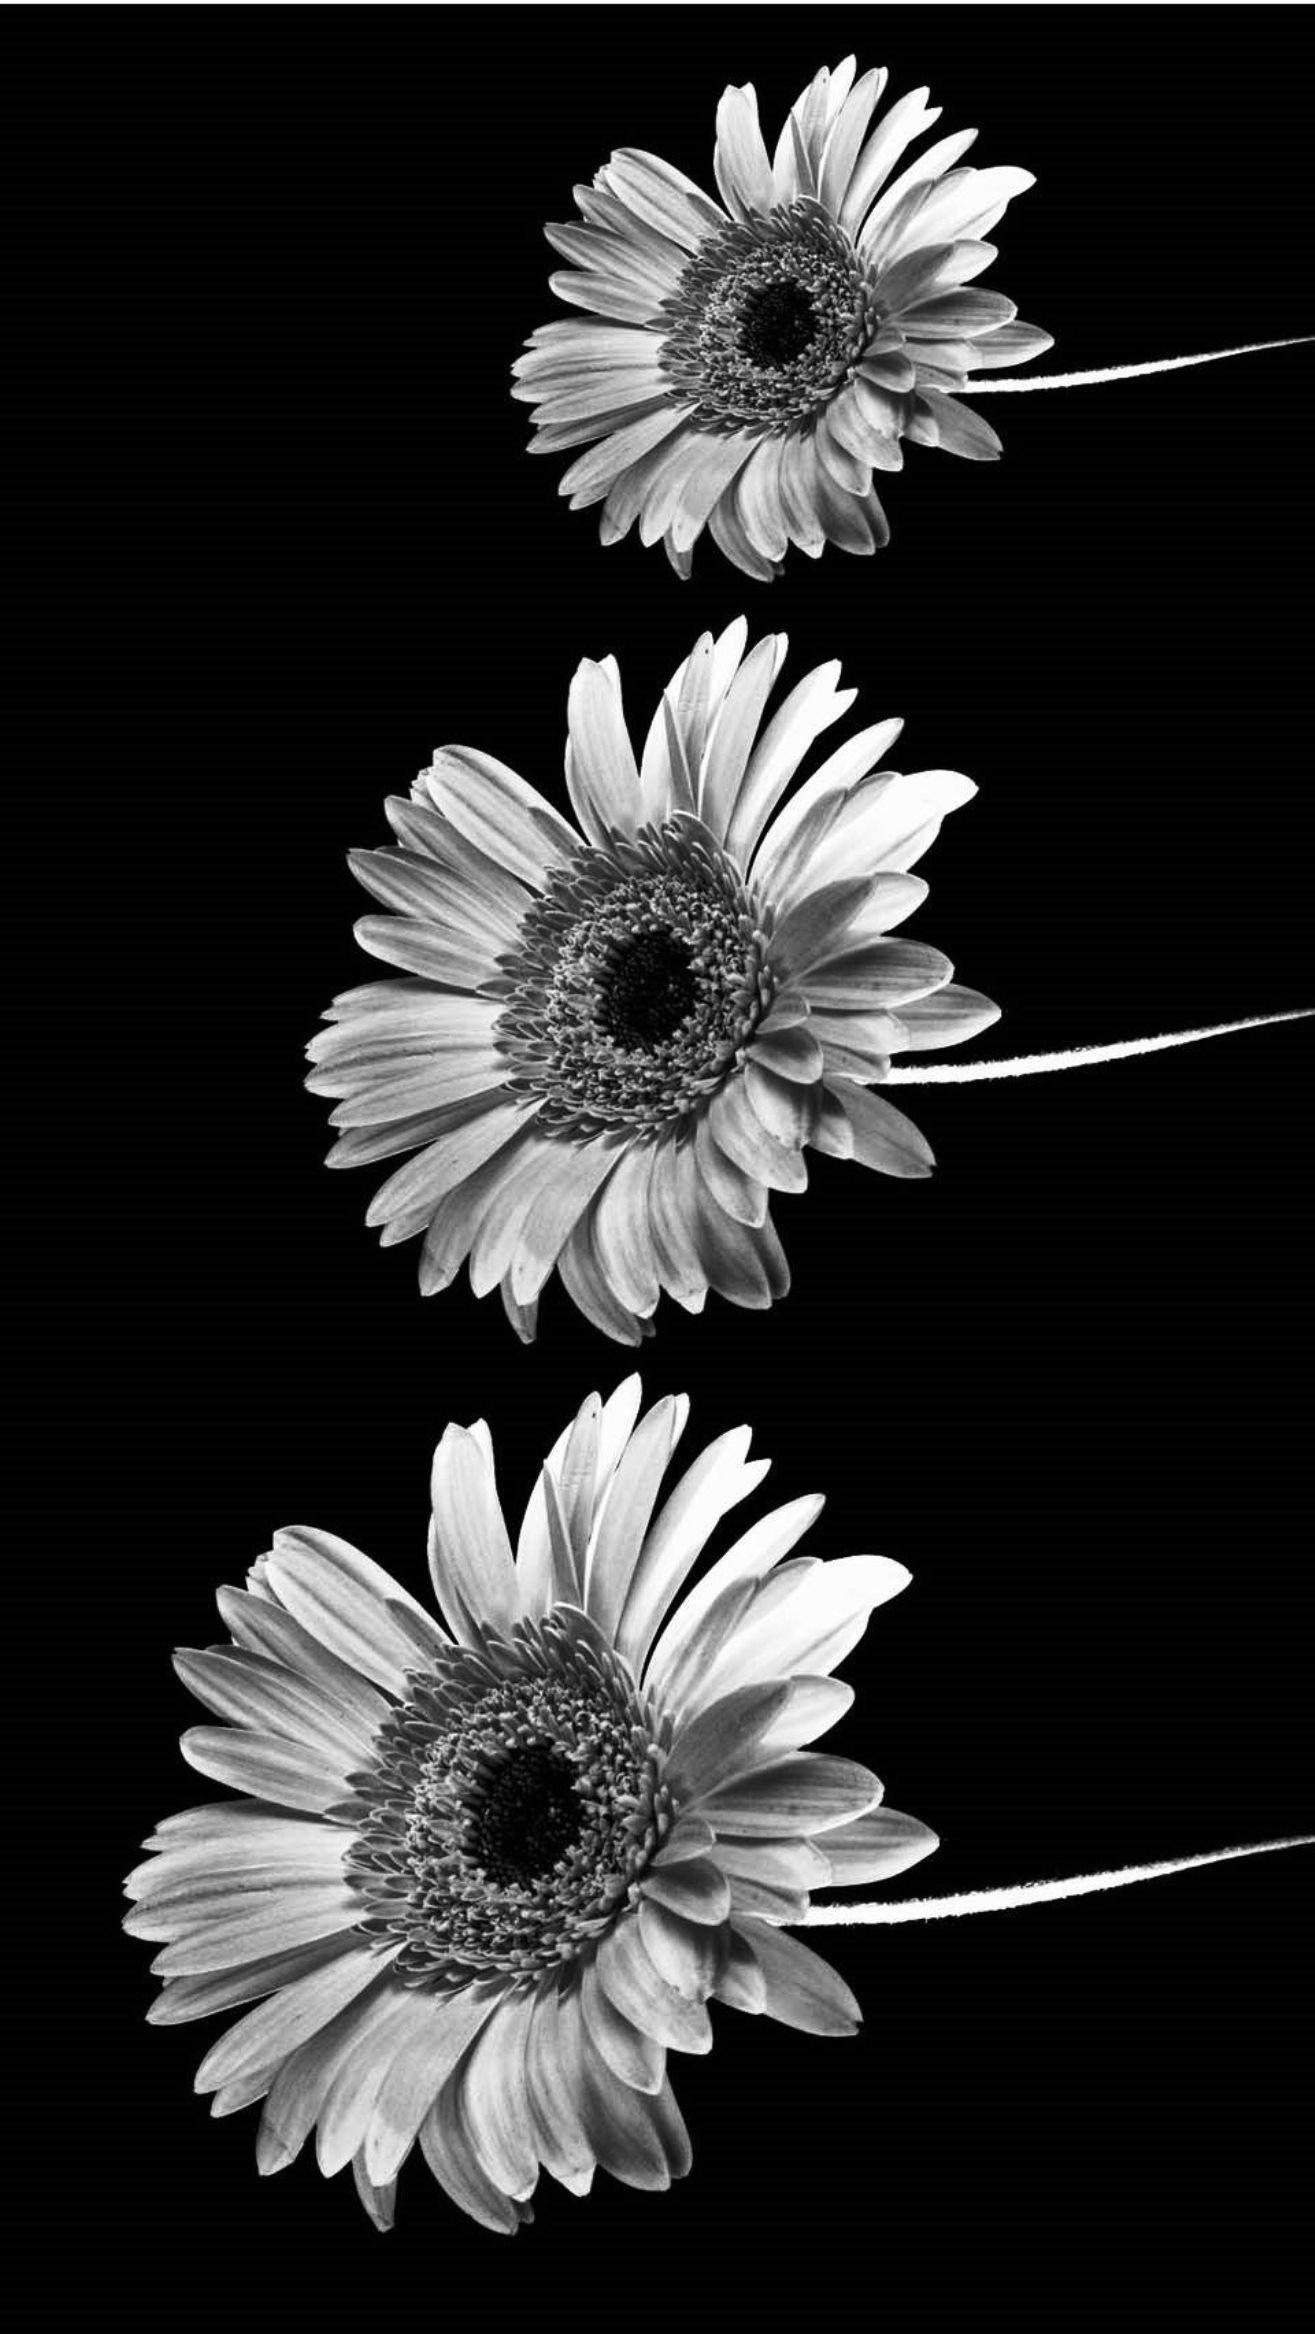 Free Sunflower Black And White Photos and Vectors